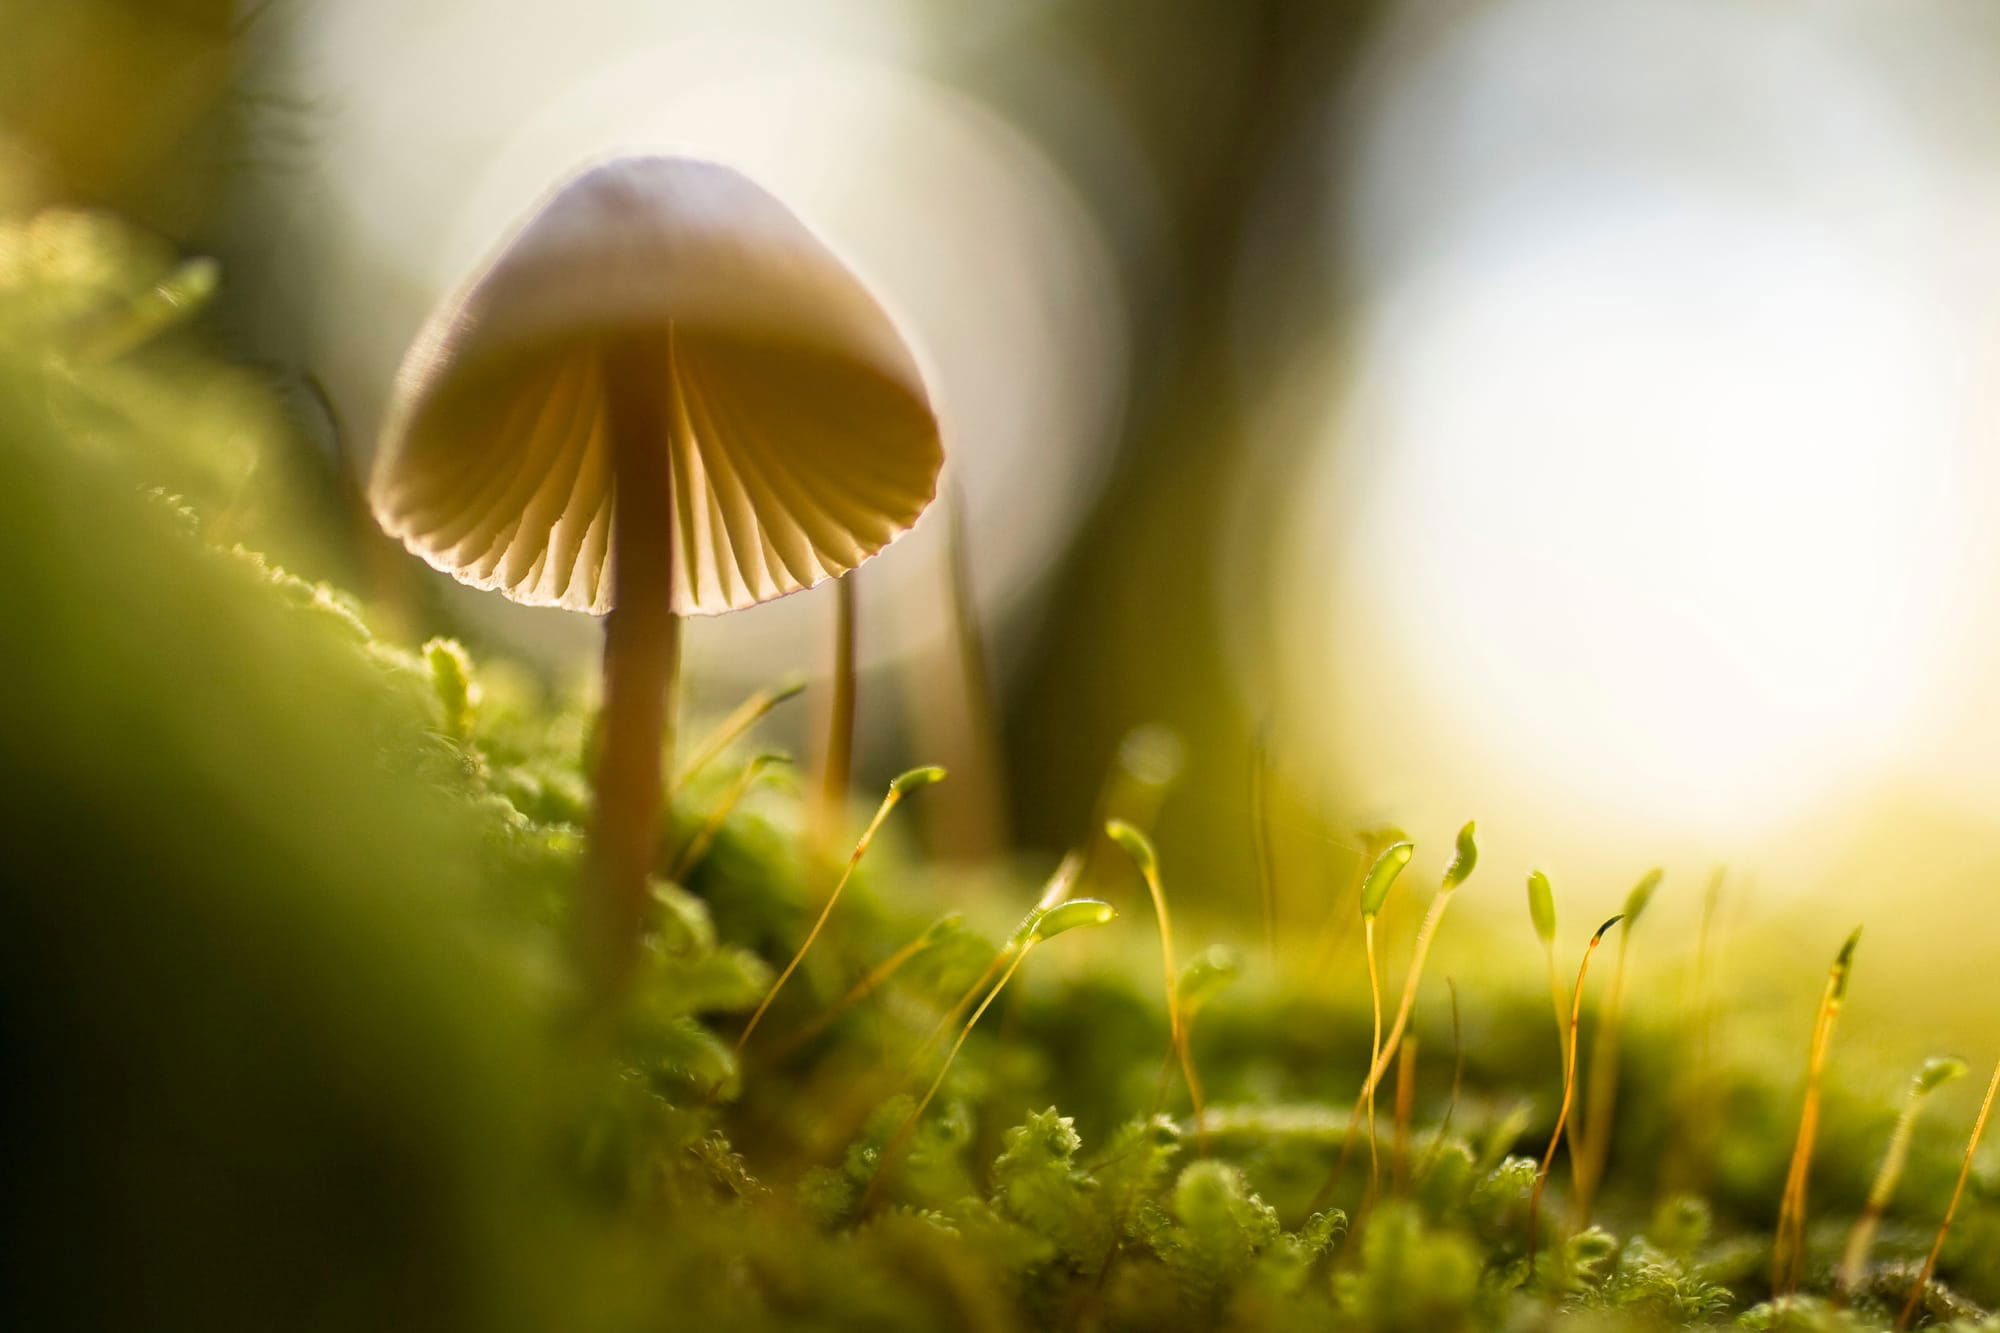 GeneFo Webinar Explores Potential of Mushrooms to Help Manage MS